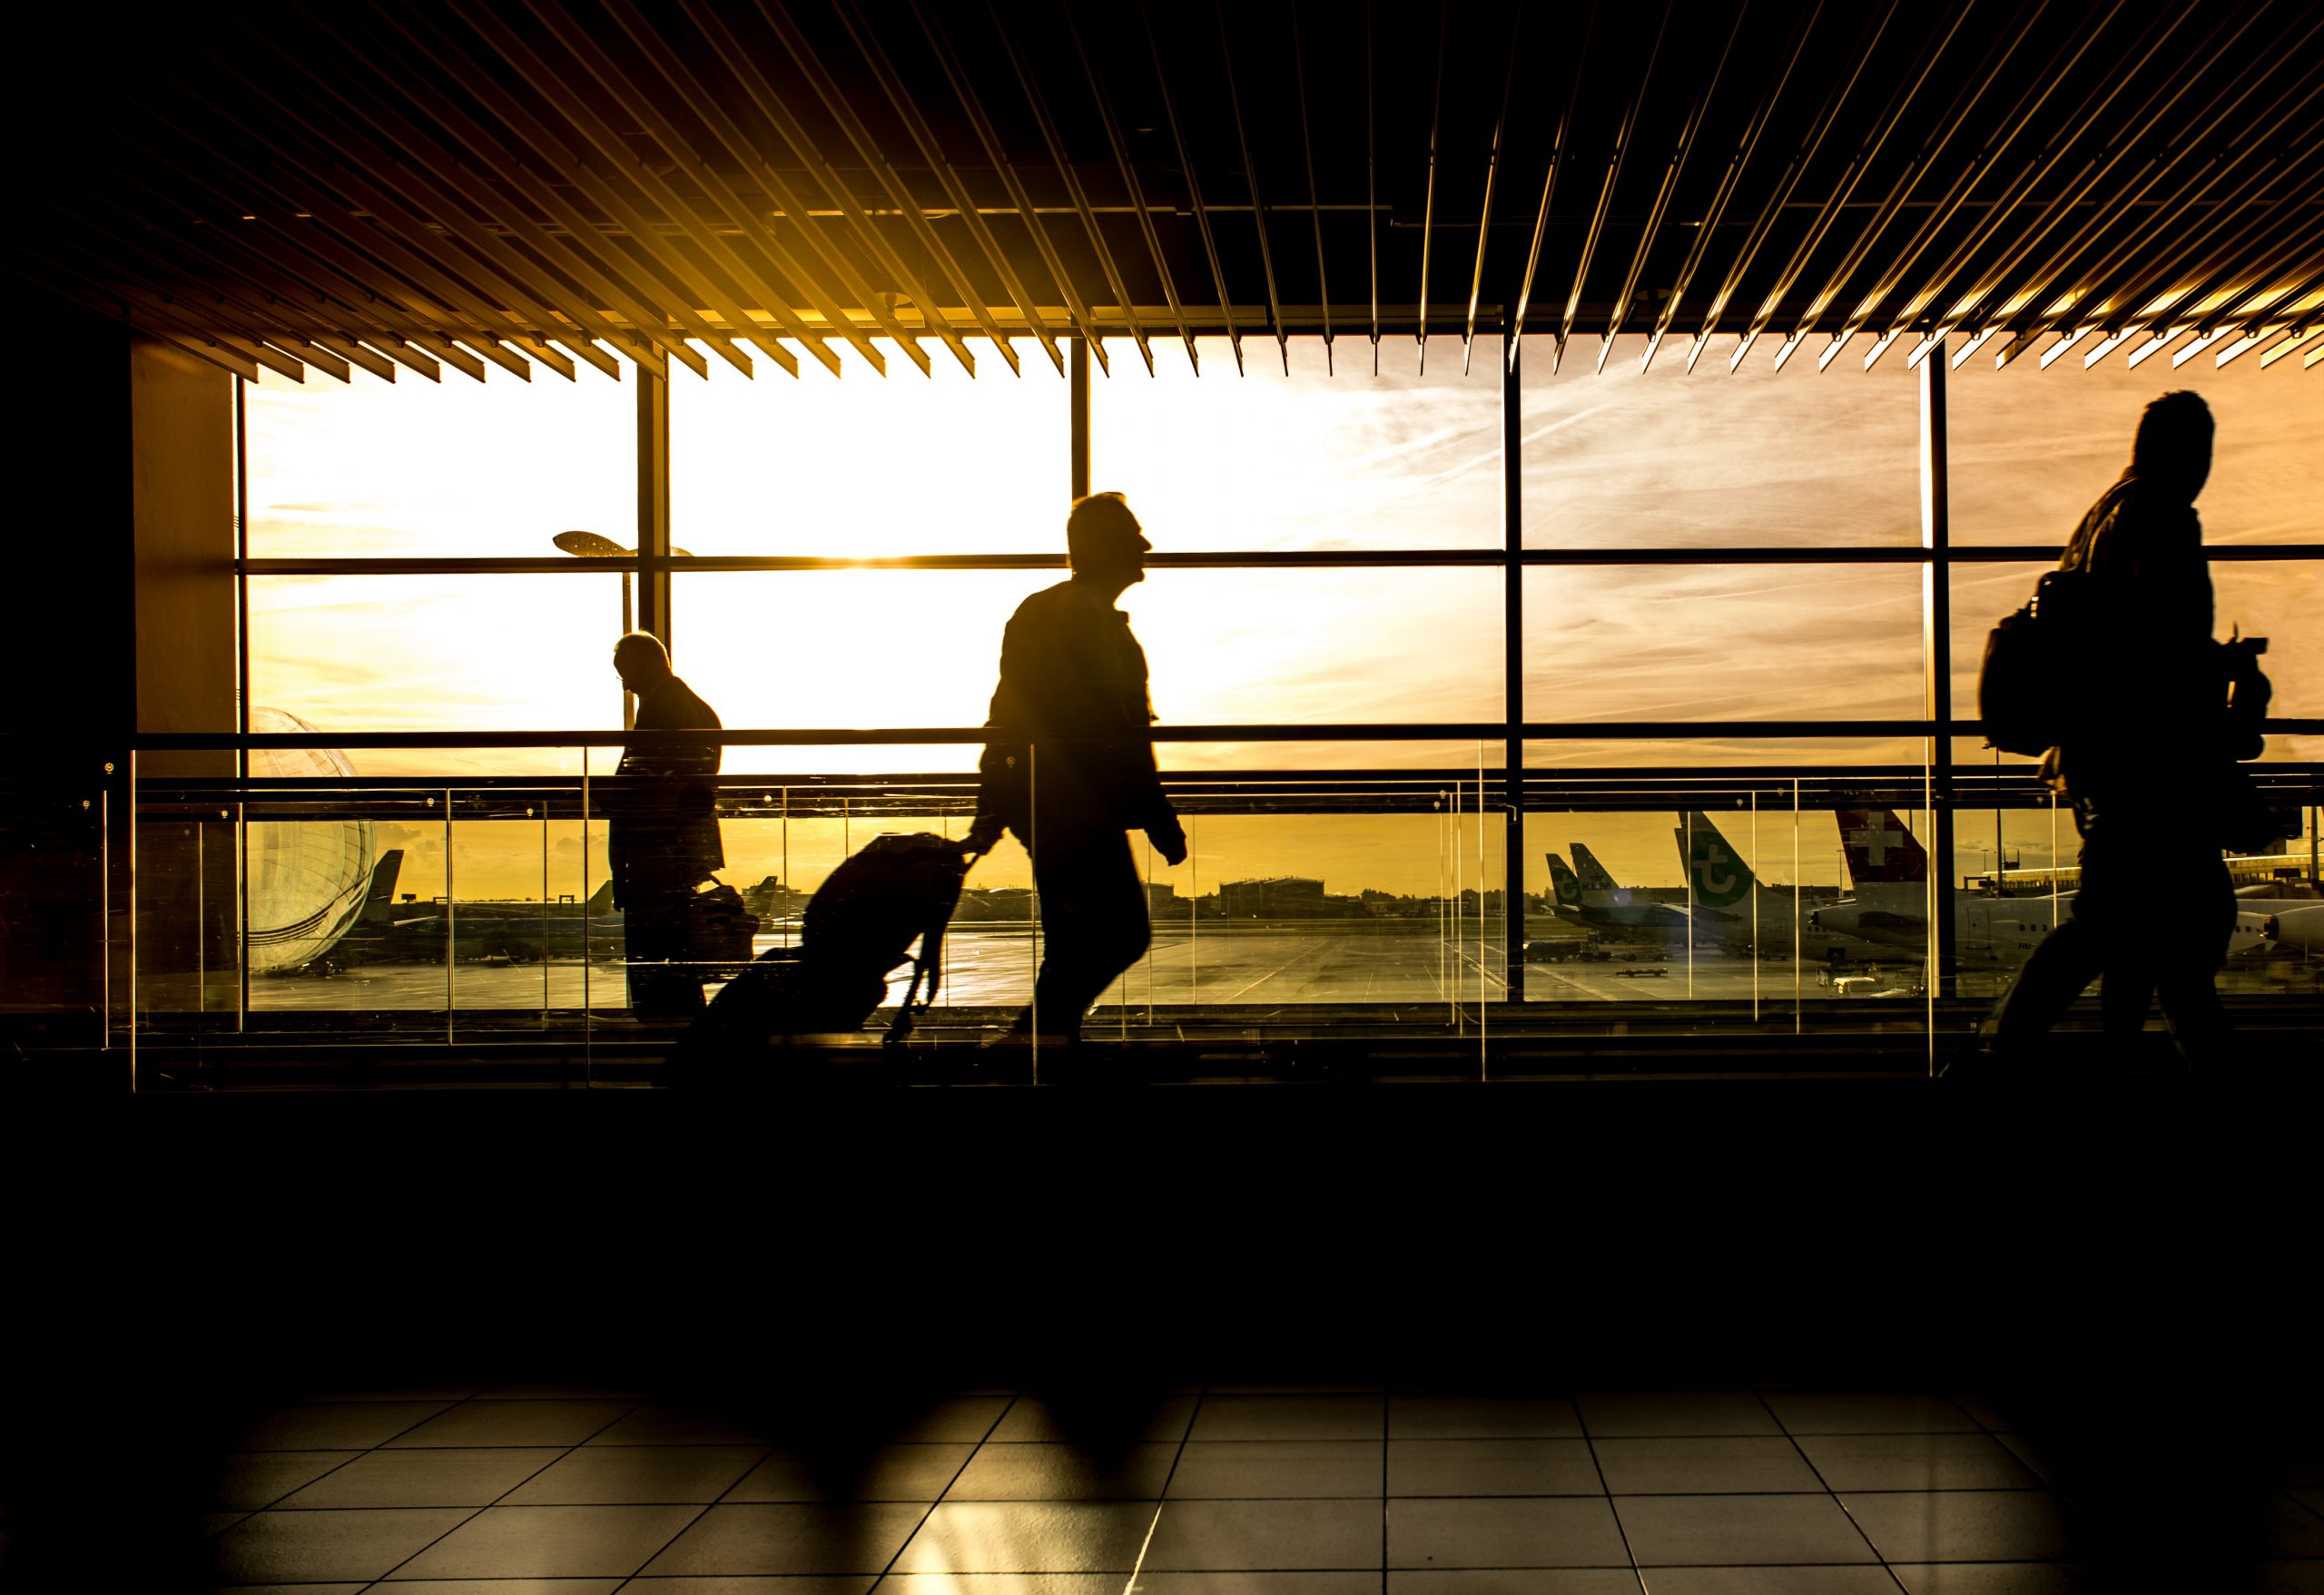 People walking through an airport - business travel safety tips